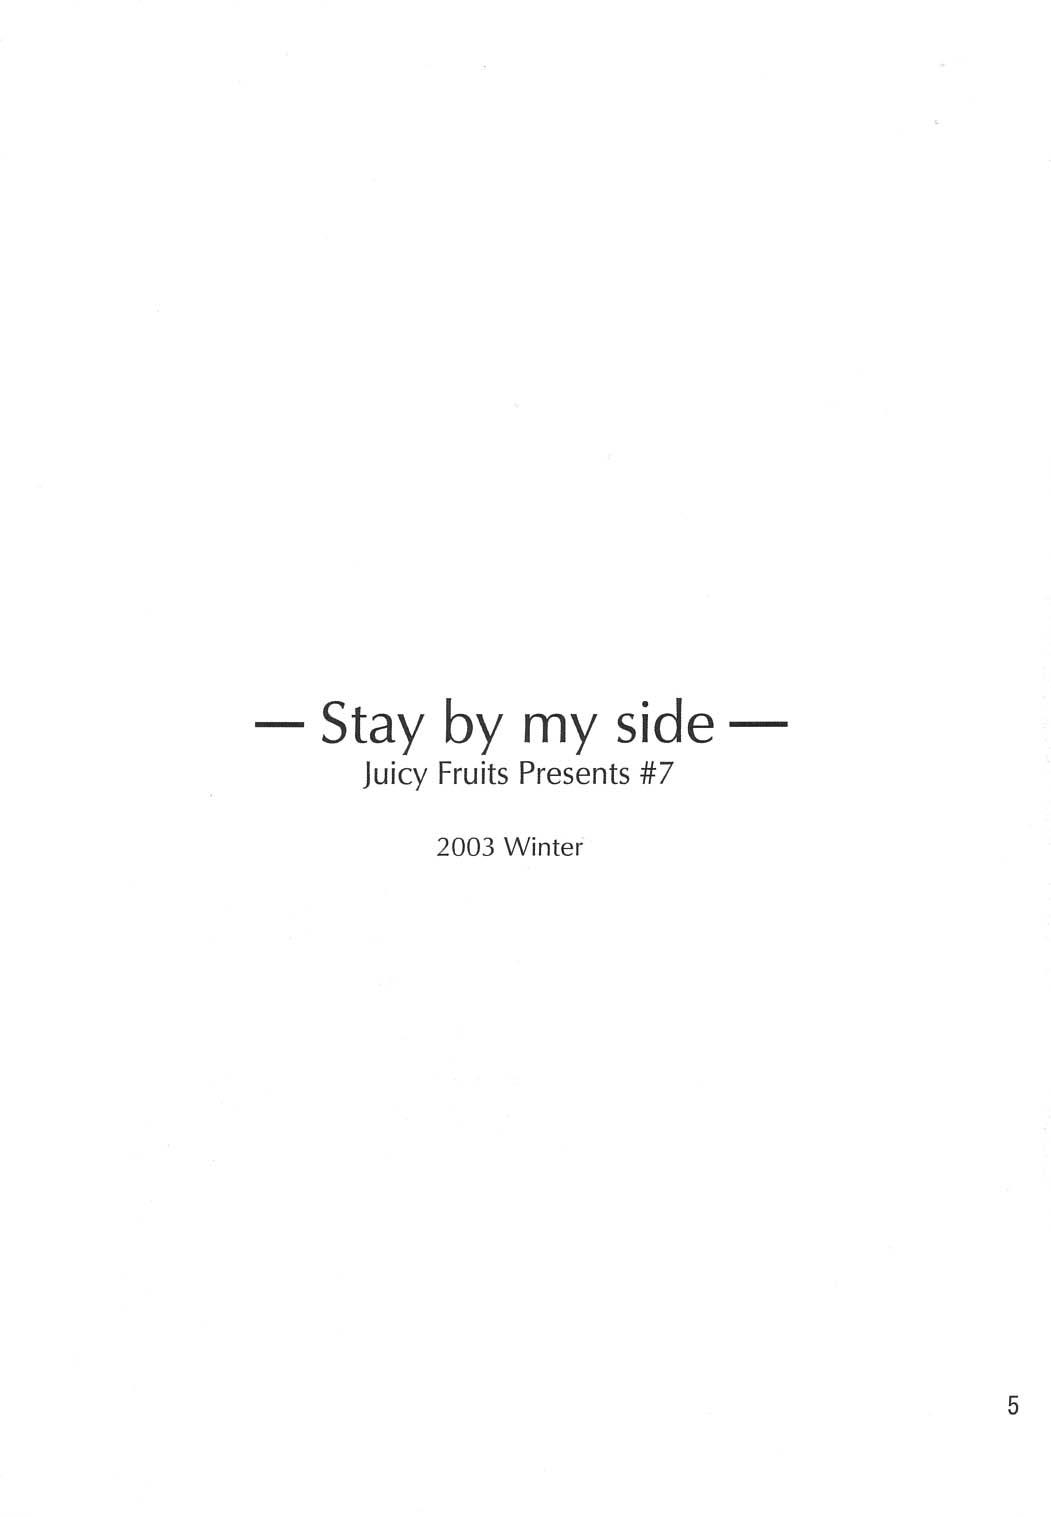 Stay by my side 2